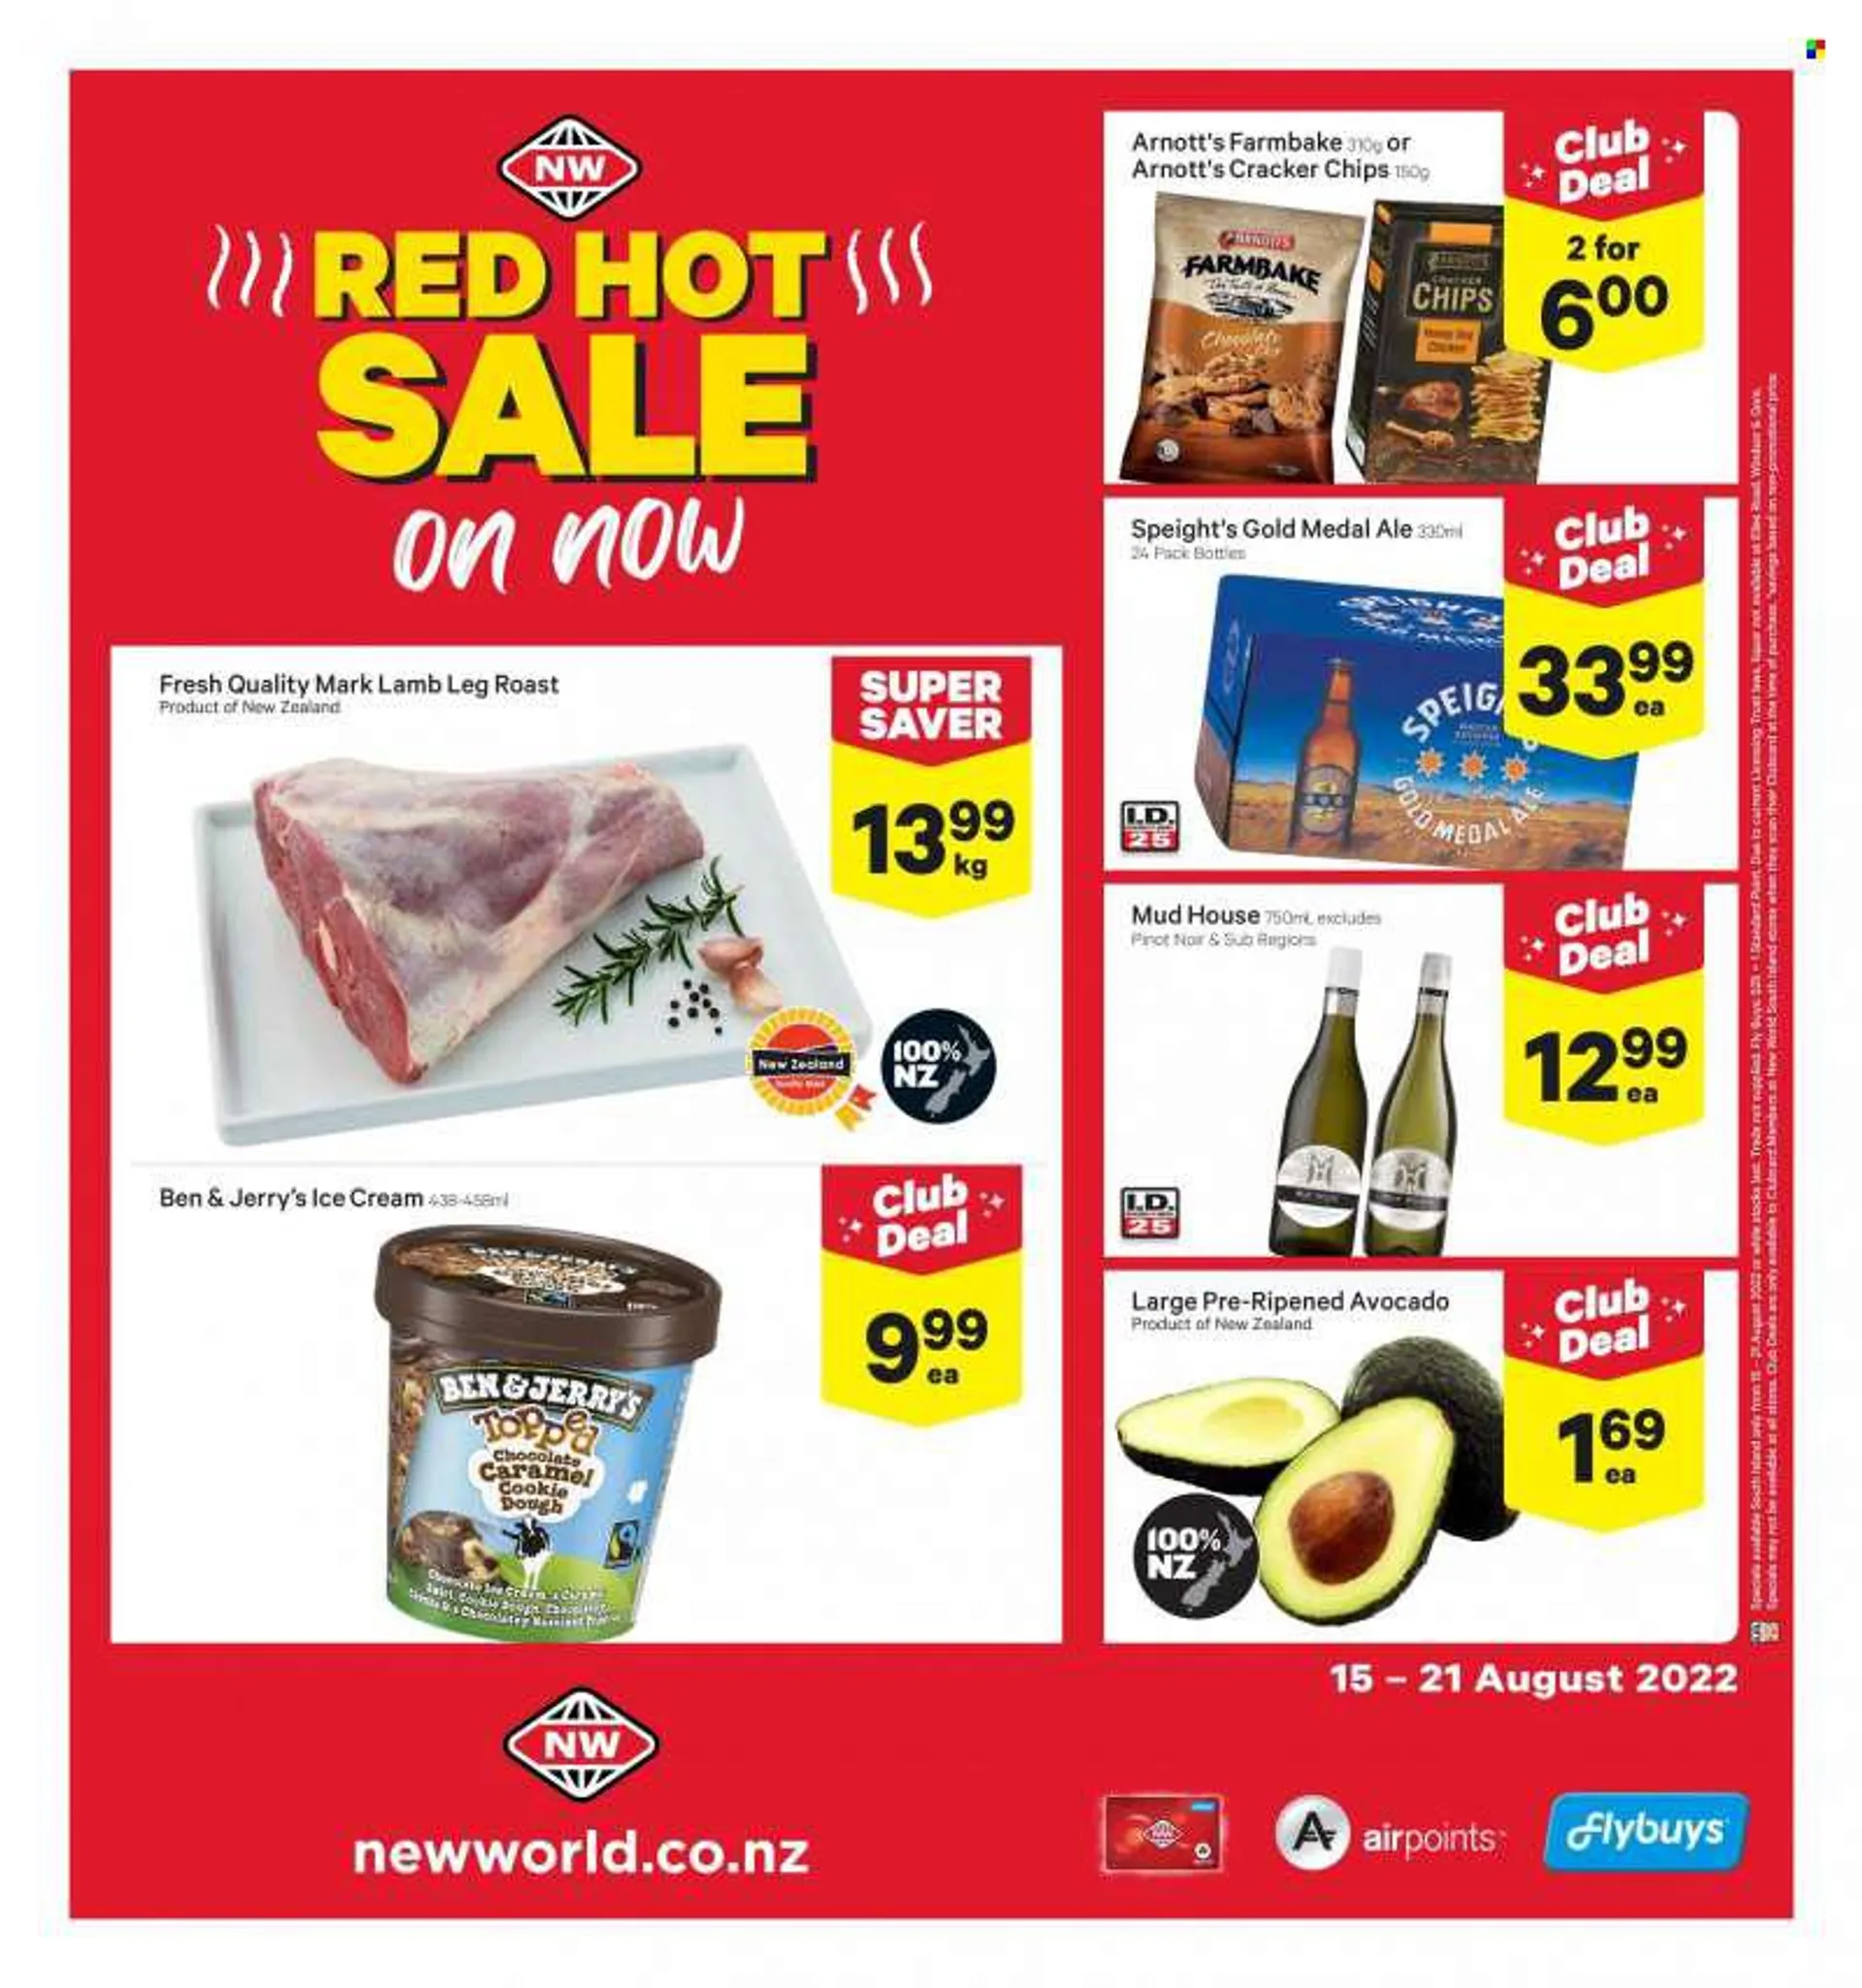 New World mailer - 15.08.2022 - 21.08.2022 - Sales products - avocado, ice cream, Ben &amp; Jerrys, crackers, chips, red wine, wine, Pinot Noir, lamb meat, lamb leg. Page 2.